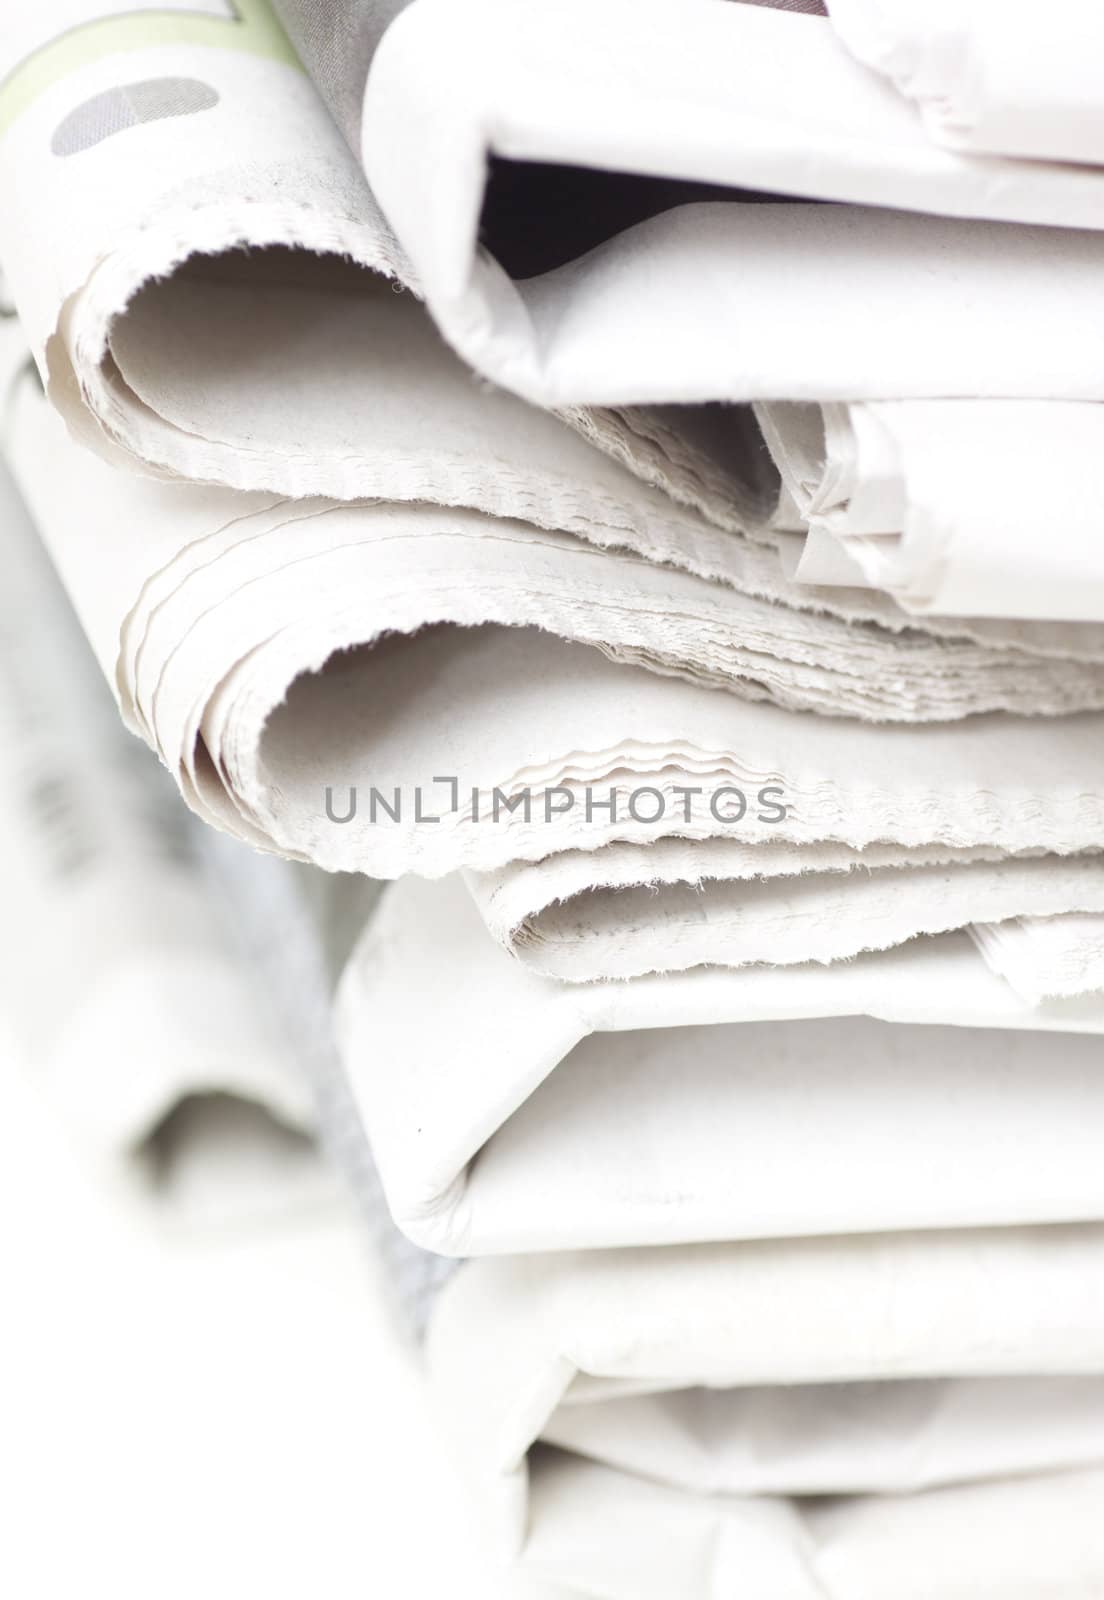 pile of newspapers on white table

